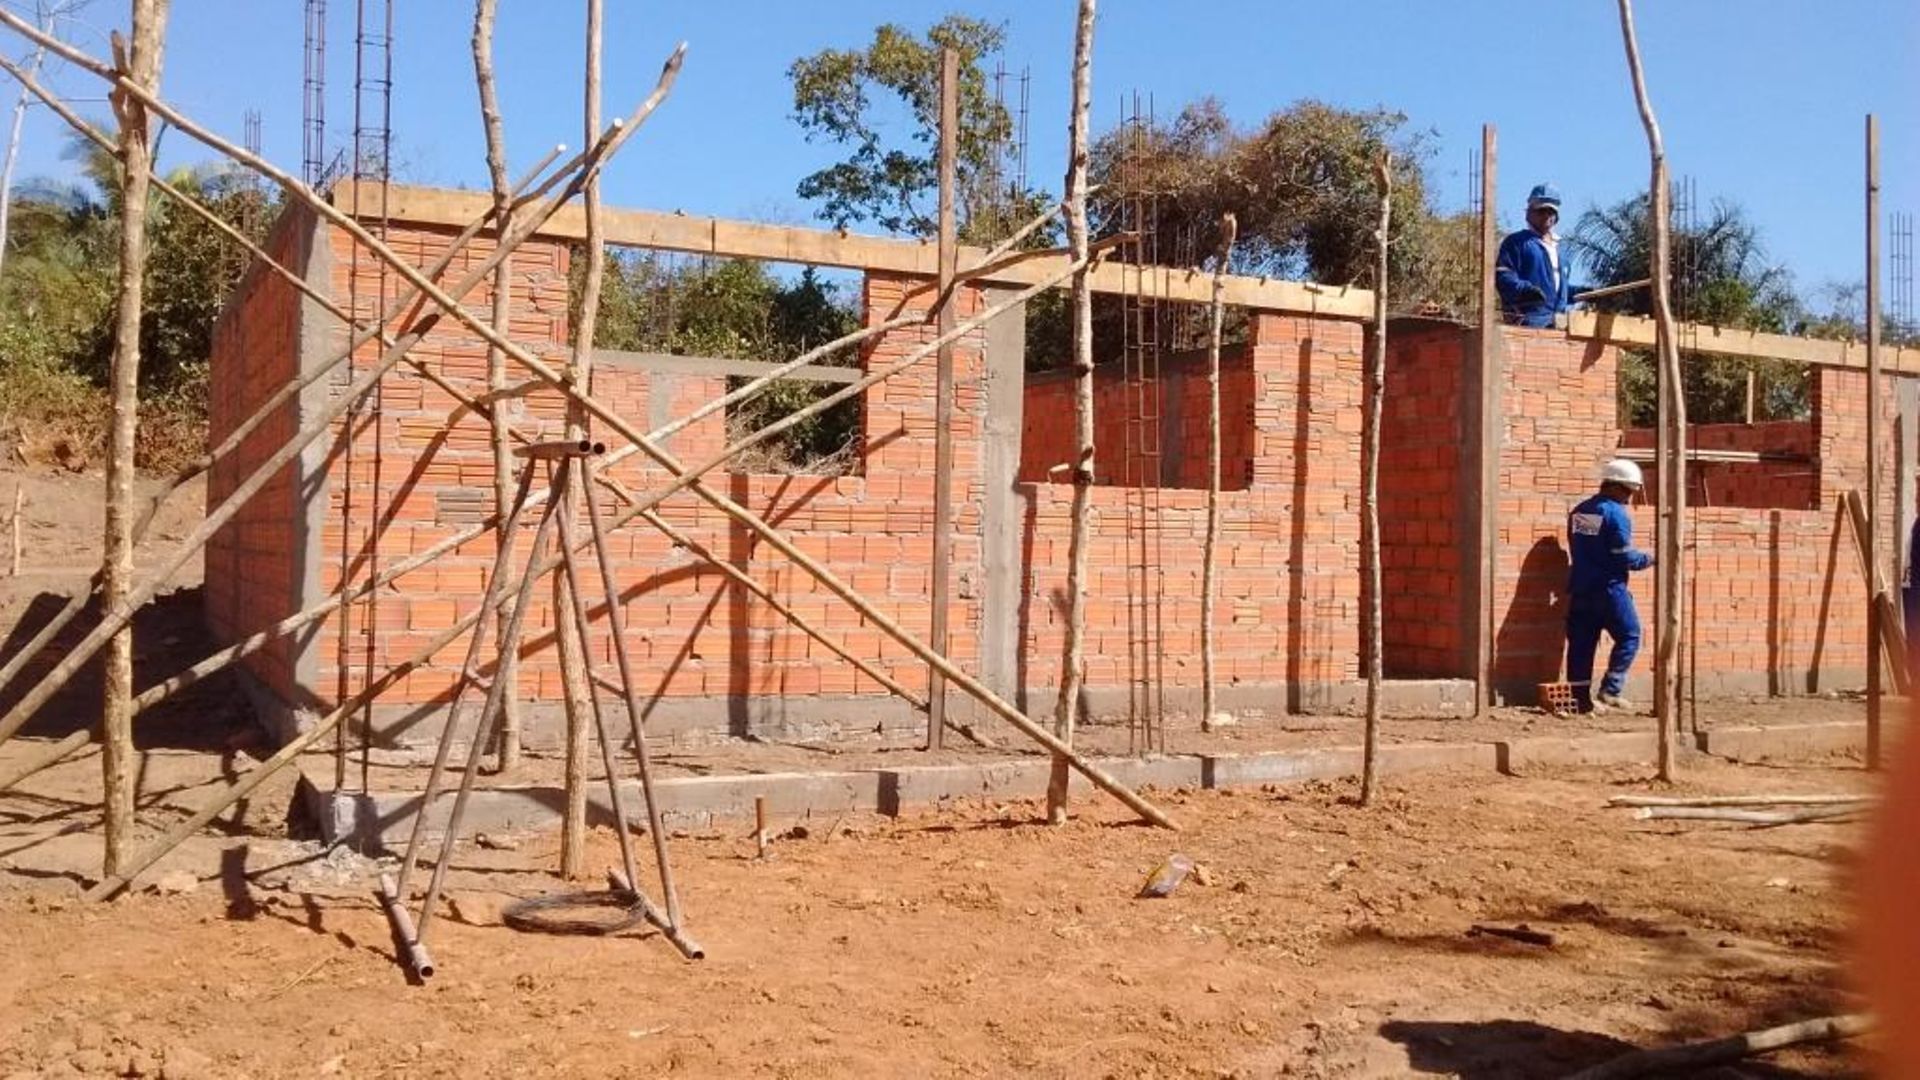 

With the support of the Fritz Henkel Stiftung foundation, Pritt and Plan International have helped to construct a new school in Mata Virgem.